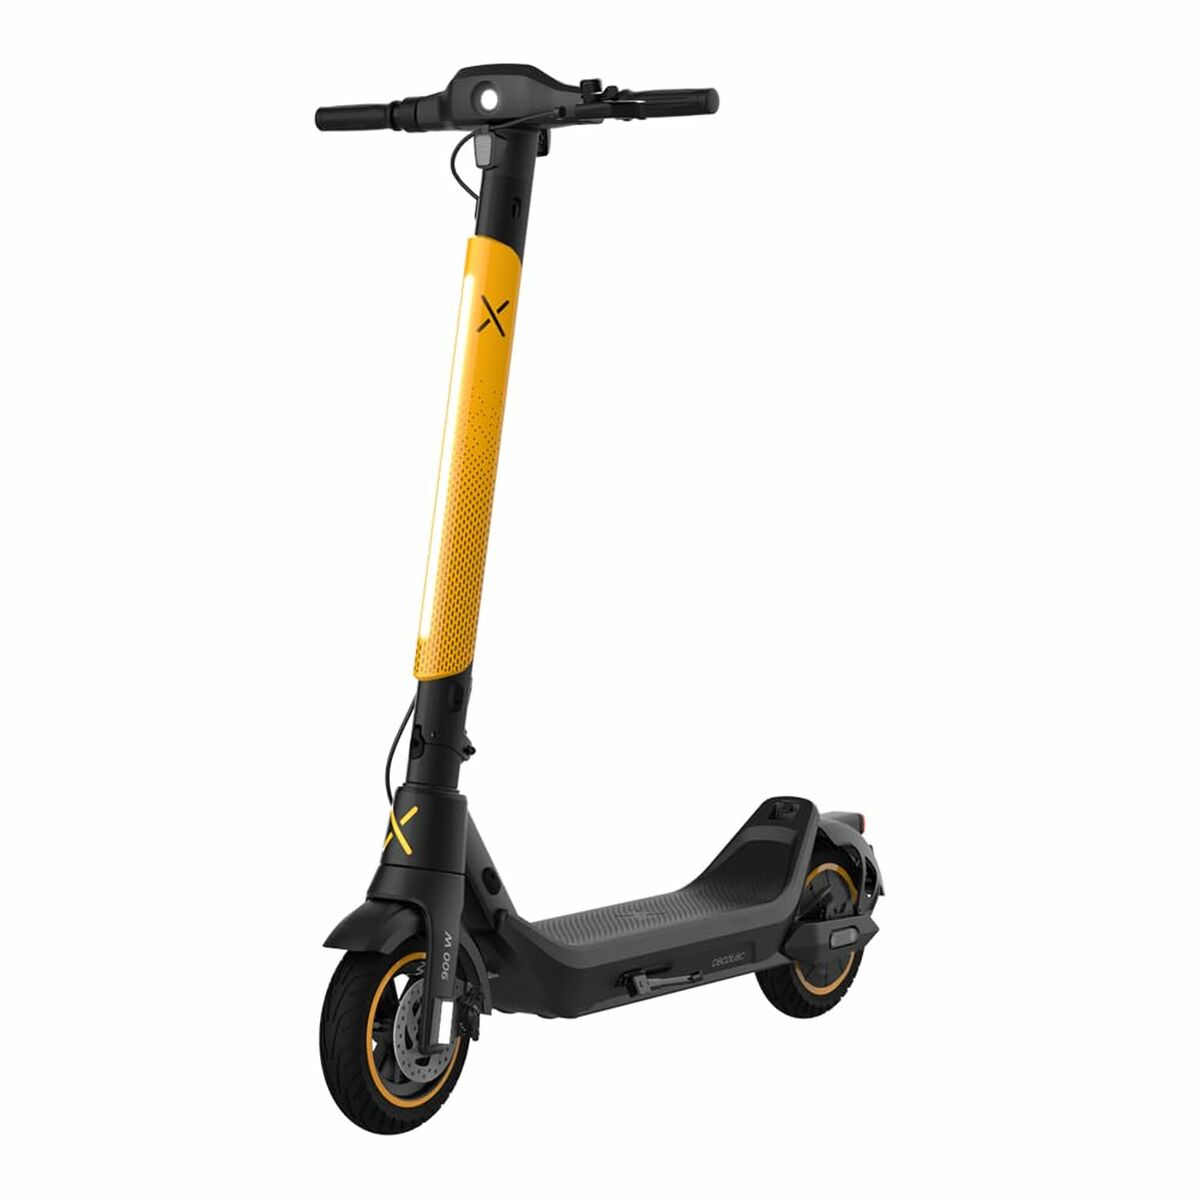 Electric Scooter Cecotec Bongo Serie X45 Sport Connected 900 W